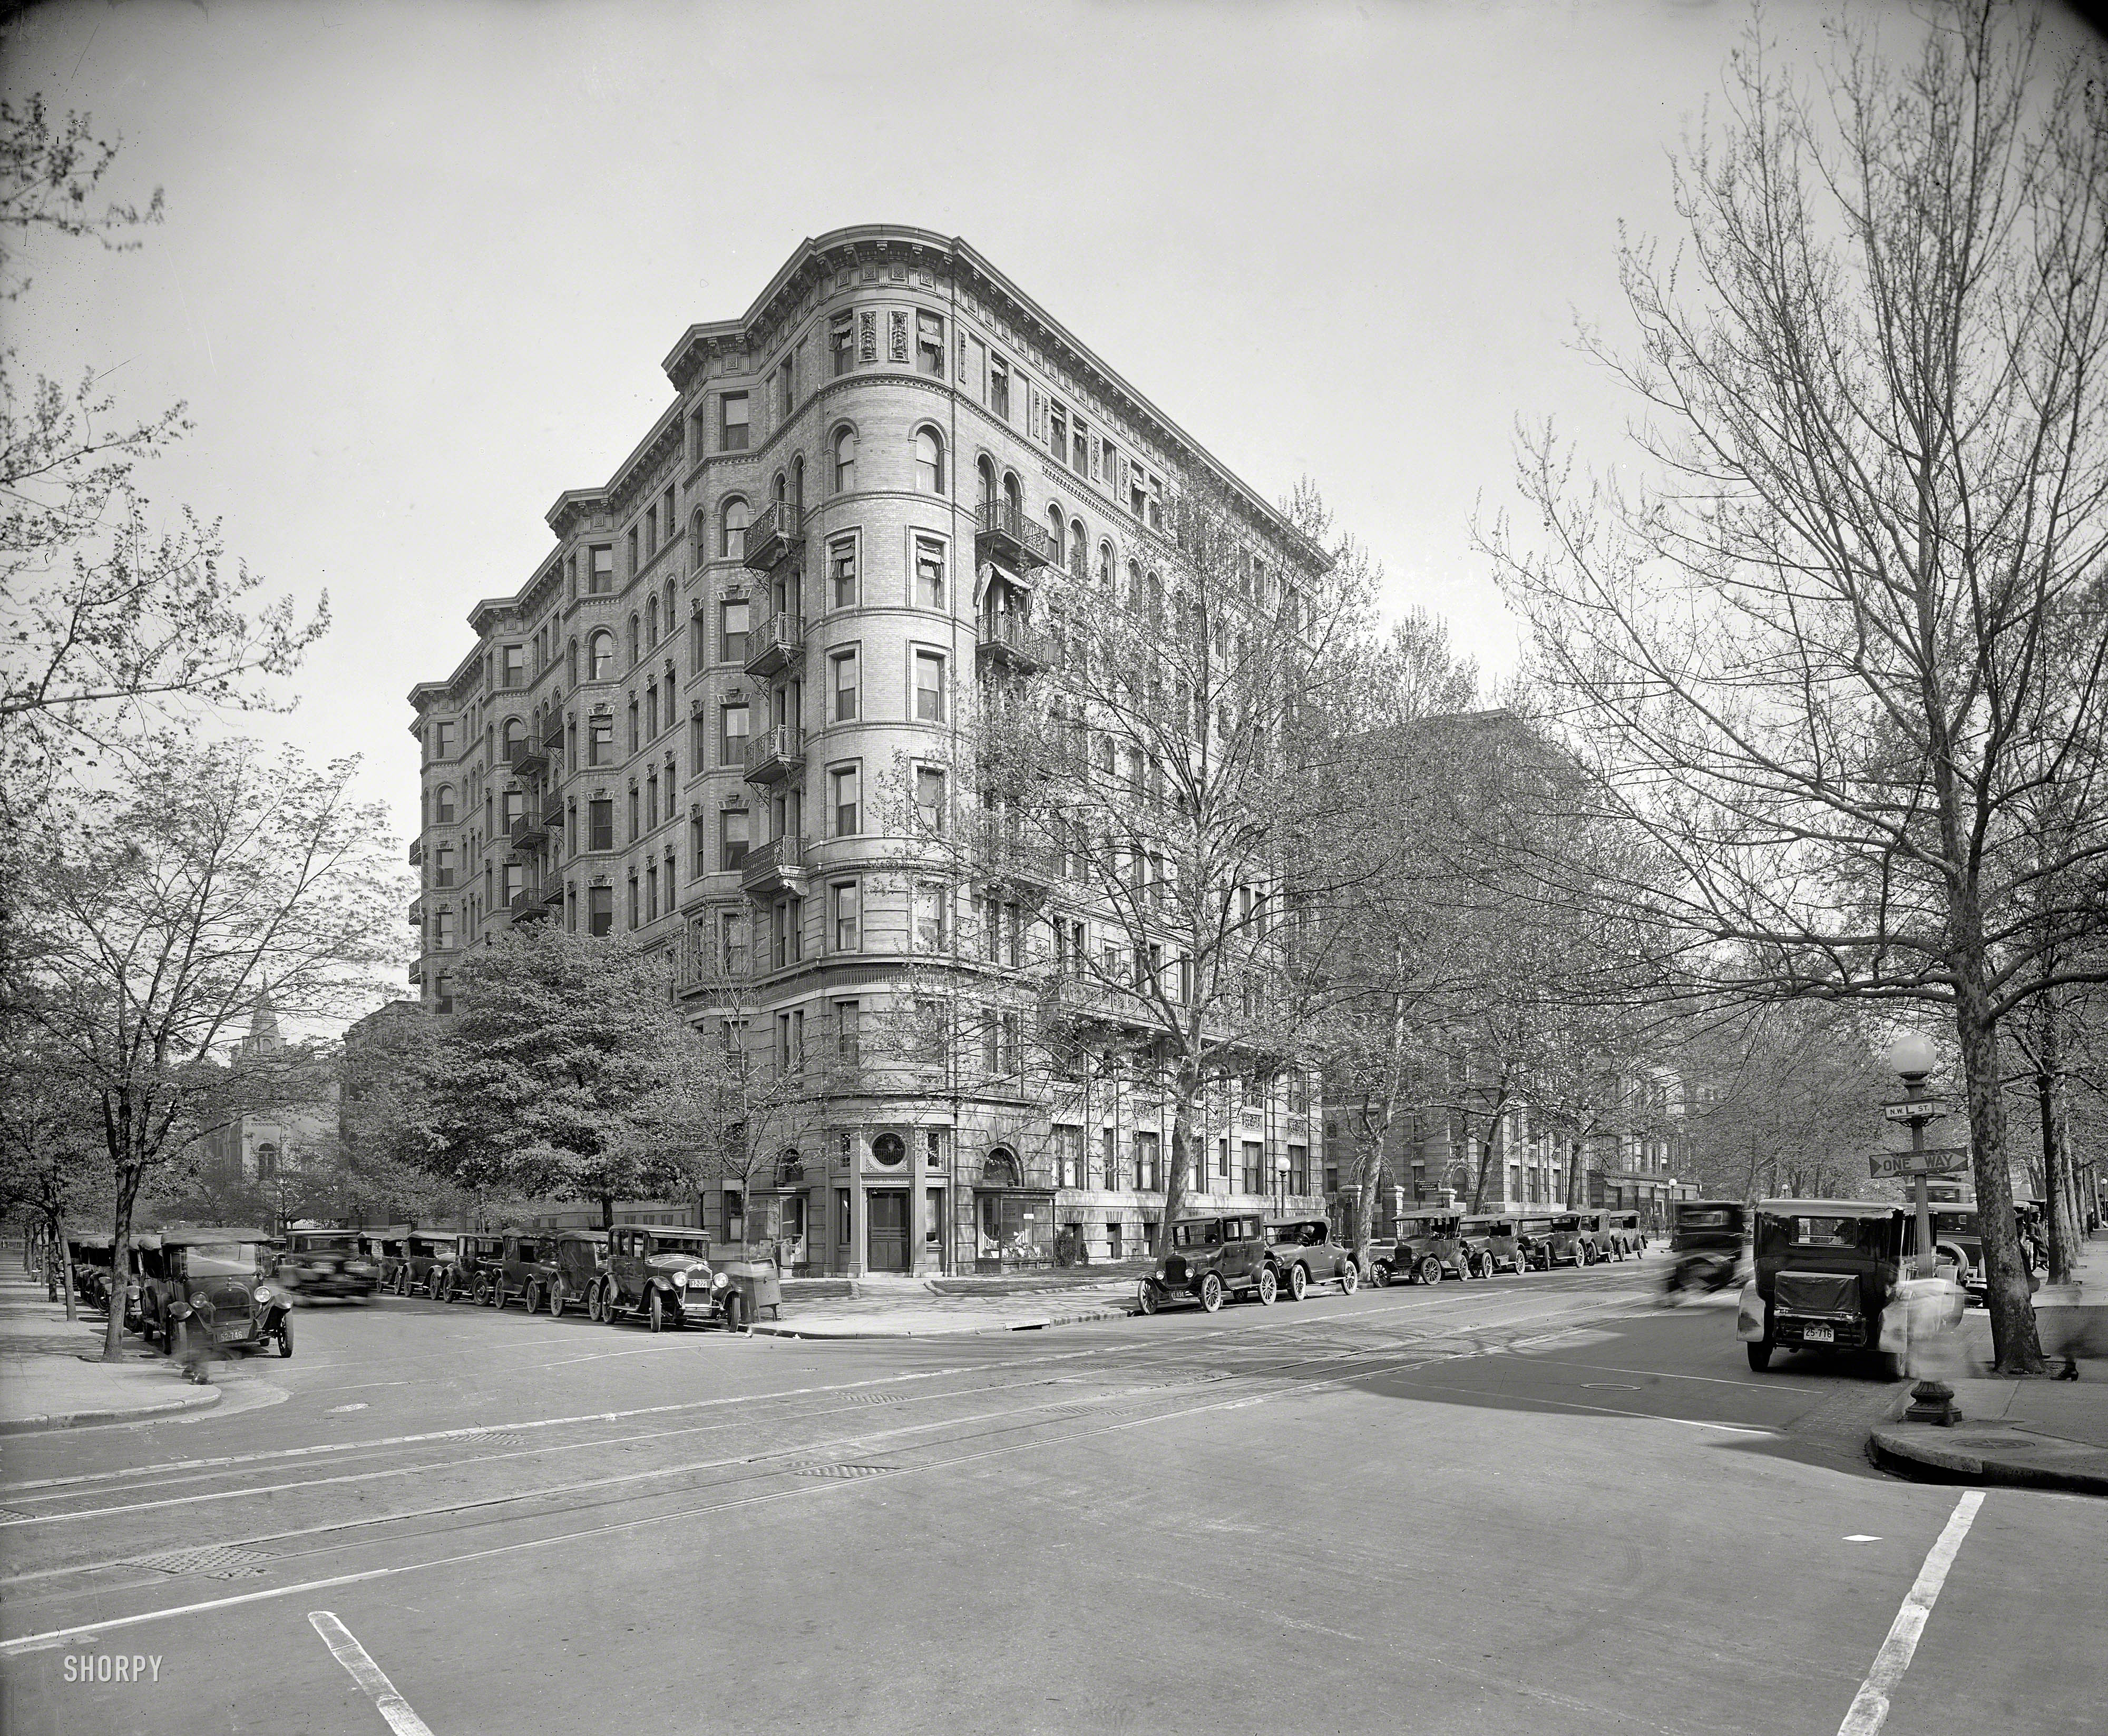 Washington, D.C., 1925. "Stoneleigh Court apartments, L Street and Connecticut Avenue N.W." Close inspection will be rewarded with a wealth of detail afforded by this 8x10 glass negative, the highlights including disembodied pedestrian parts captured in mid-stride, and perhaps the earliest appearance on these pages of a ONE WAY traffic sign. National Photo Company Collection. View full size.